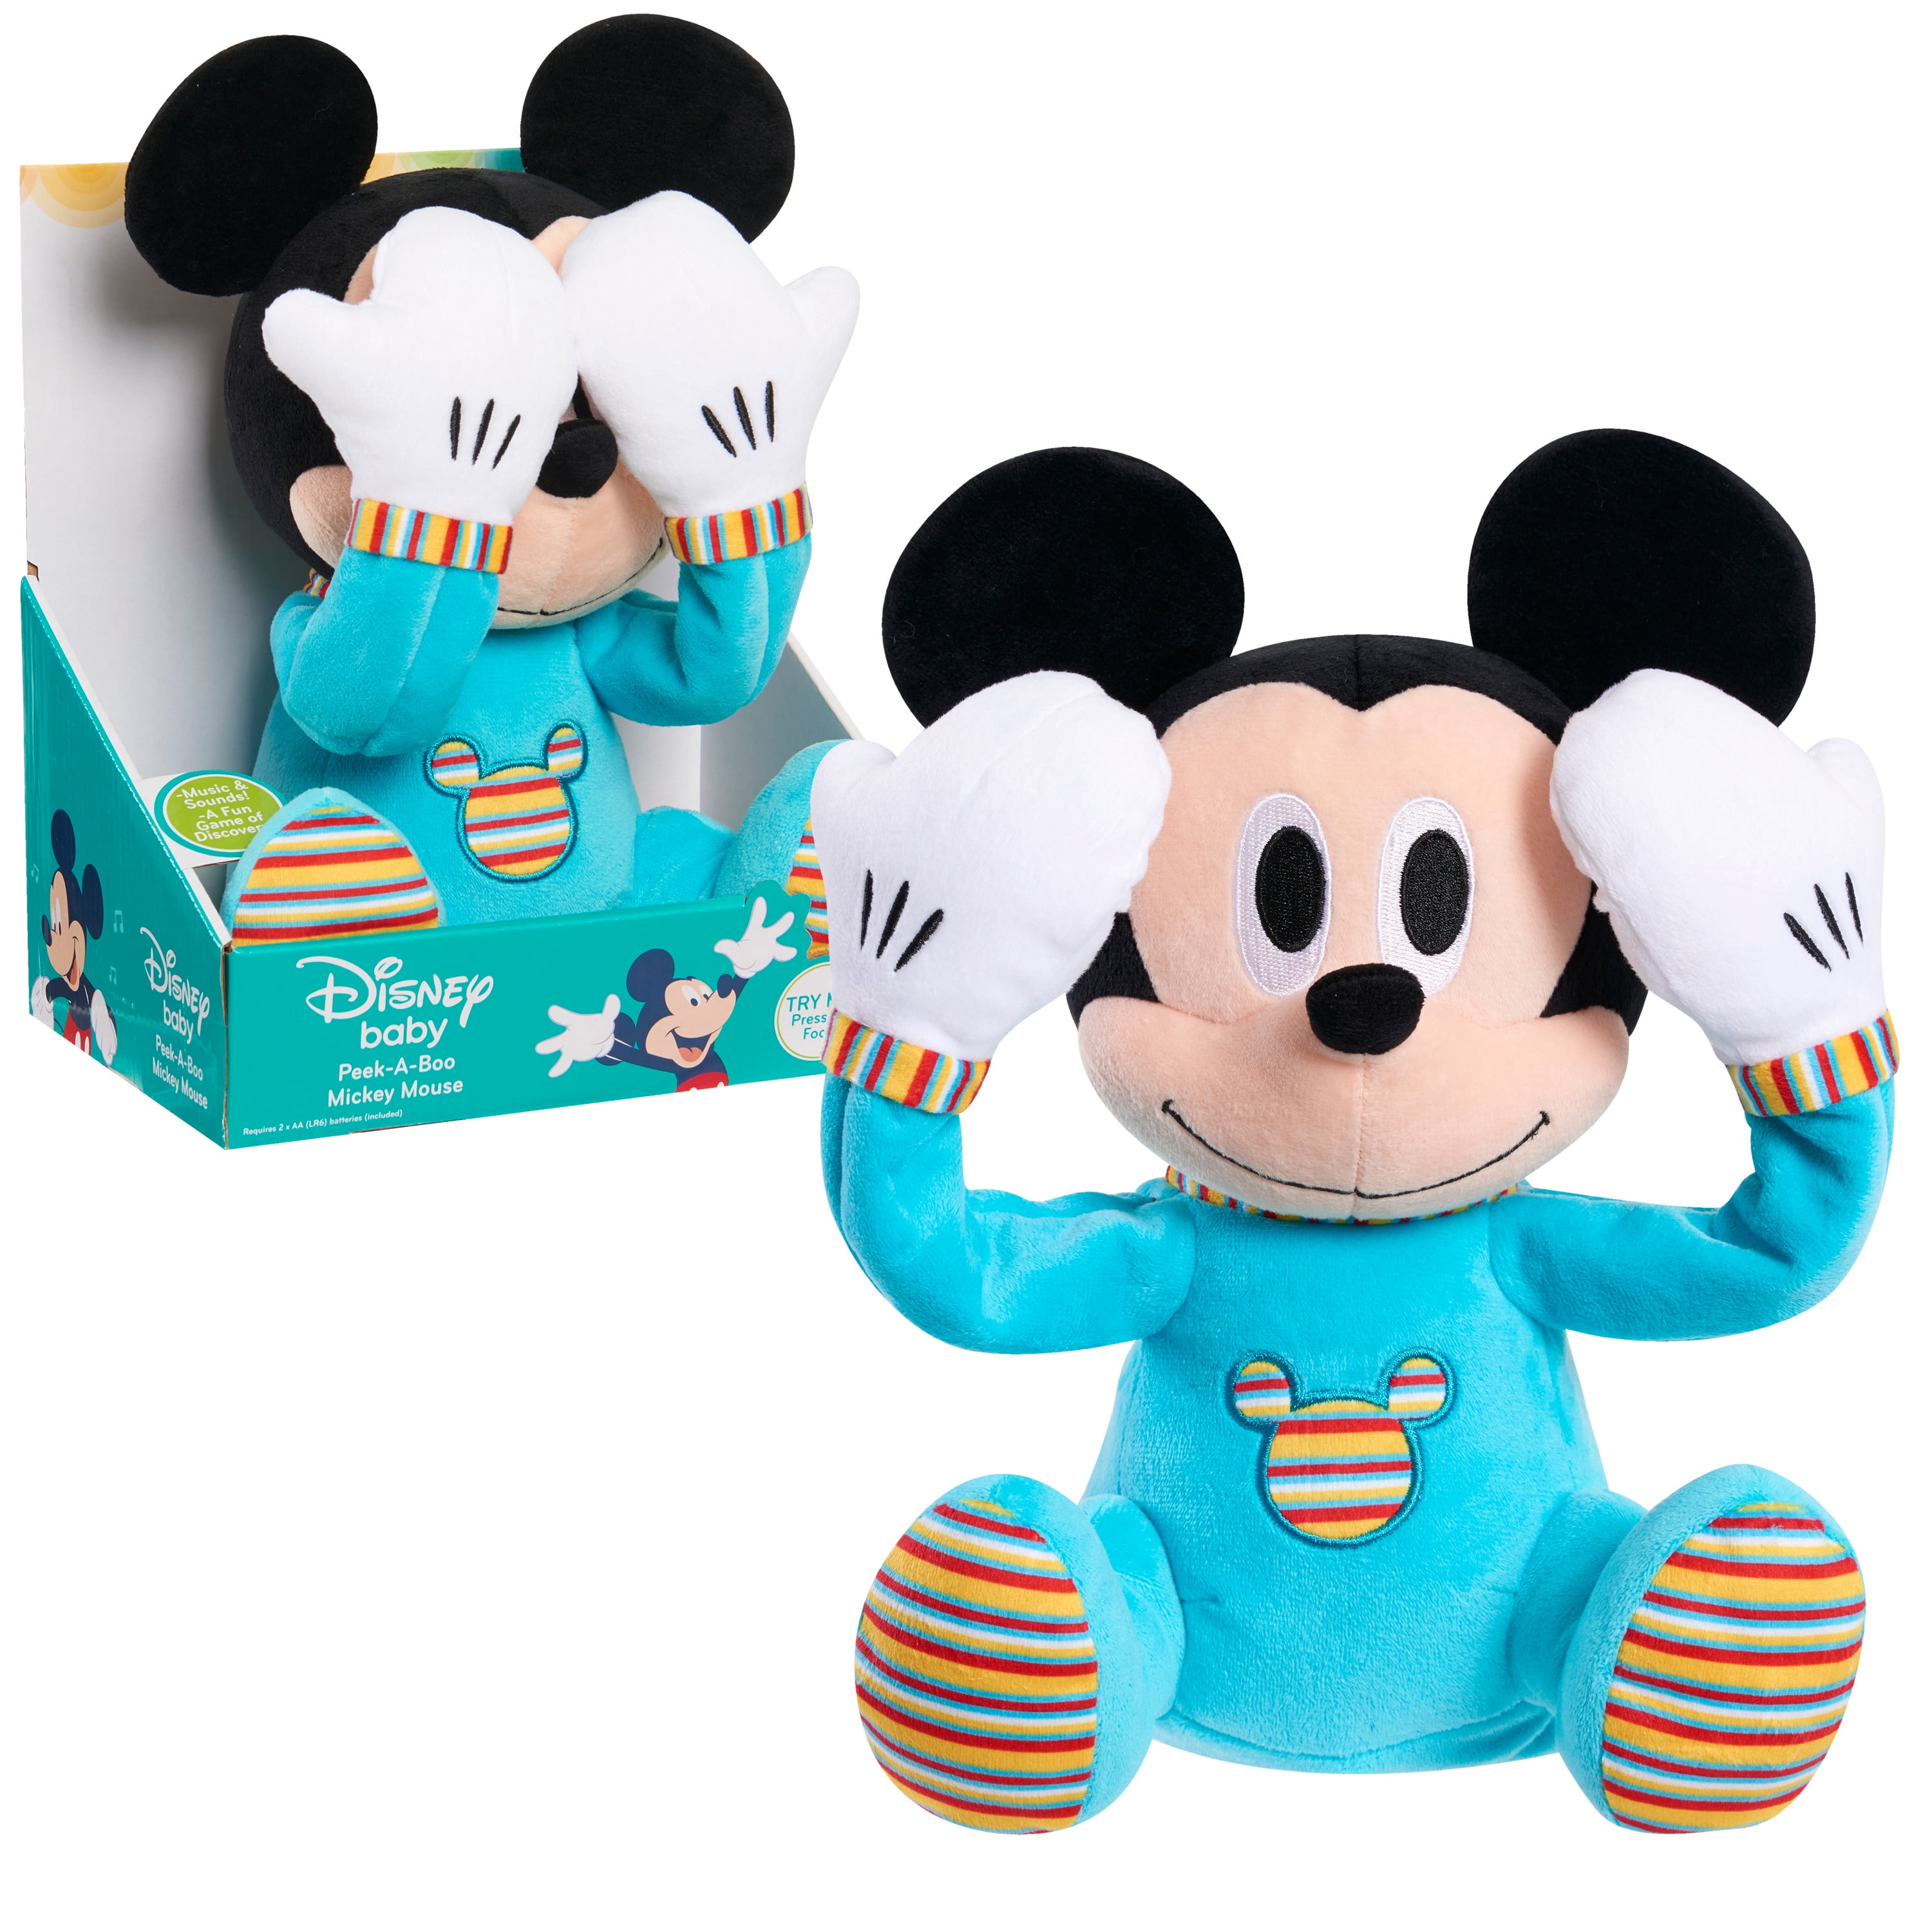 Disney Store Authentic Mickey Mouse Soft Plush Toy in Pouch New Born Baby Gift 